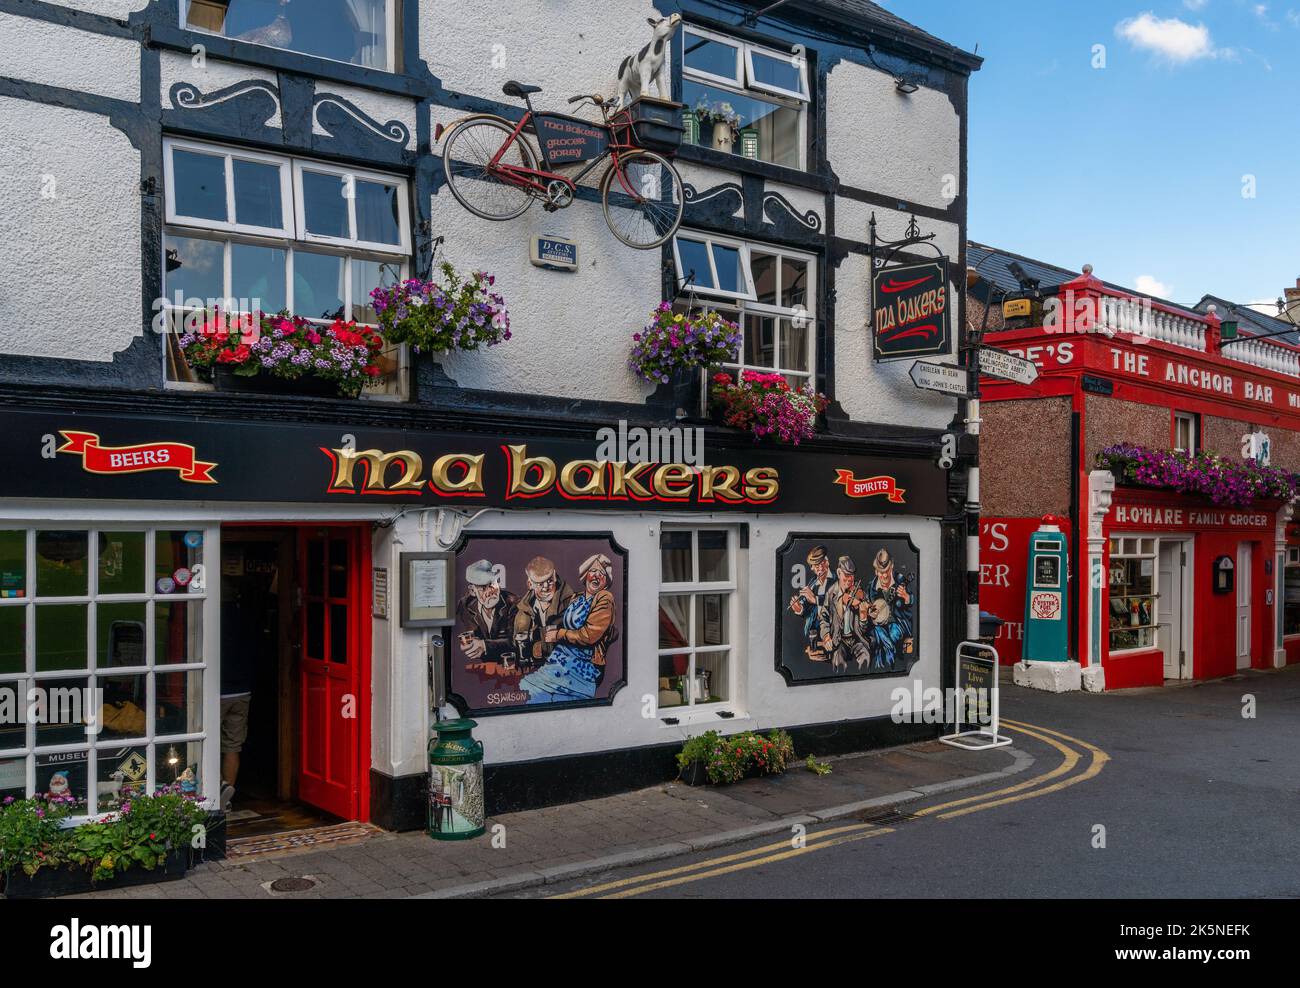 Carlingford, Ireland - 21 August, 2022: view of the historic and colorful house front of Ma Bakers Pub in the old town center of Carlingford Stock Photo